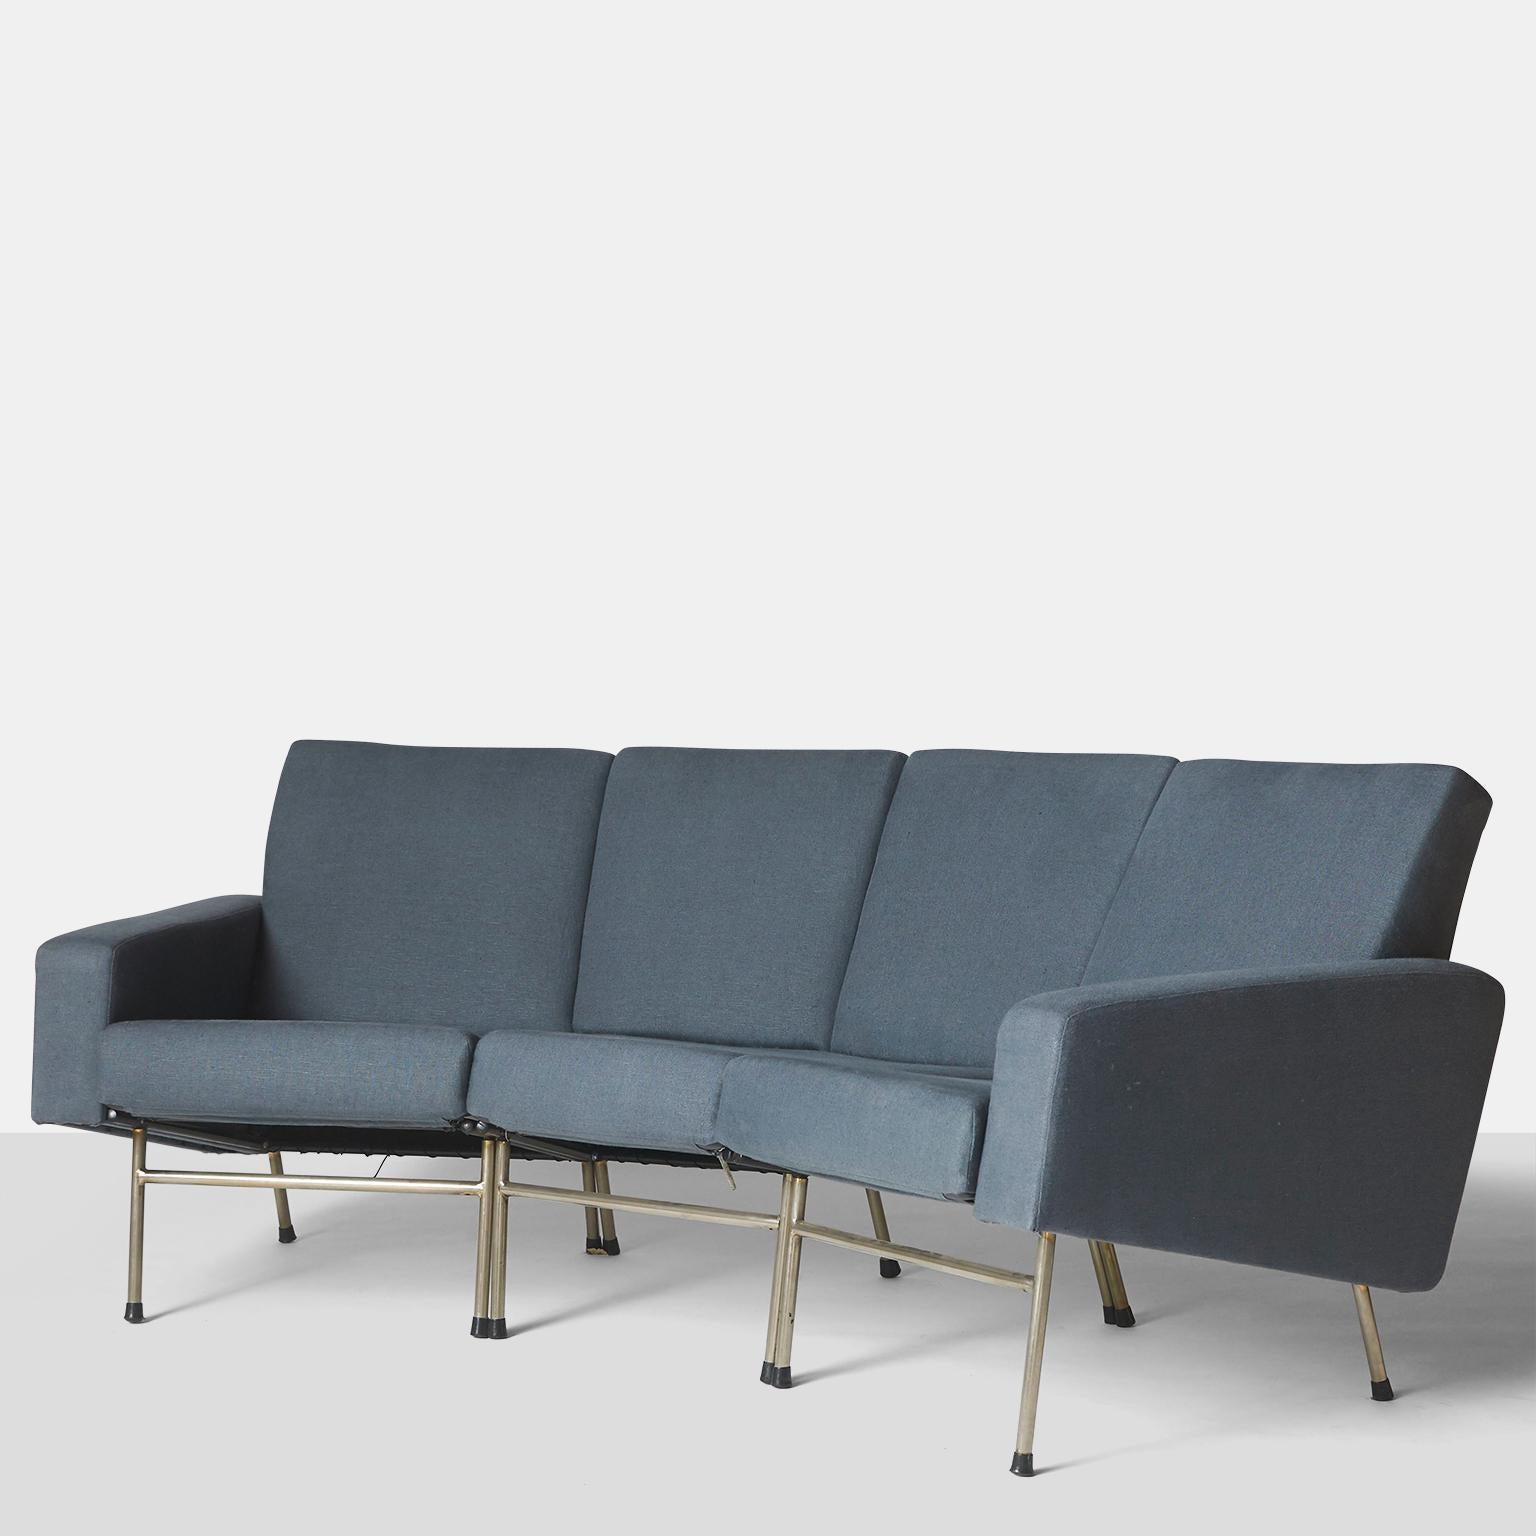 A curved, three-seat sofa by Pierre Guariche. Features chromed steel legs and sloped arm rests. Very comfortable and sleek. Model G10/4 for Airborne International.